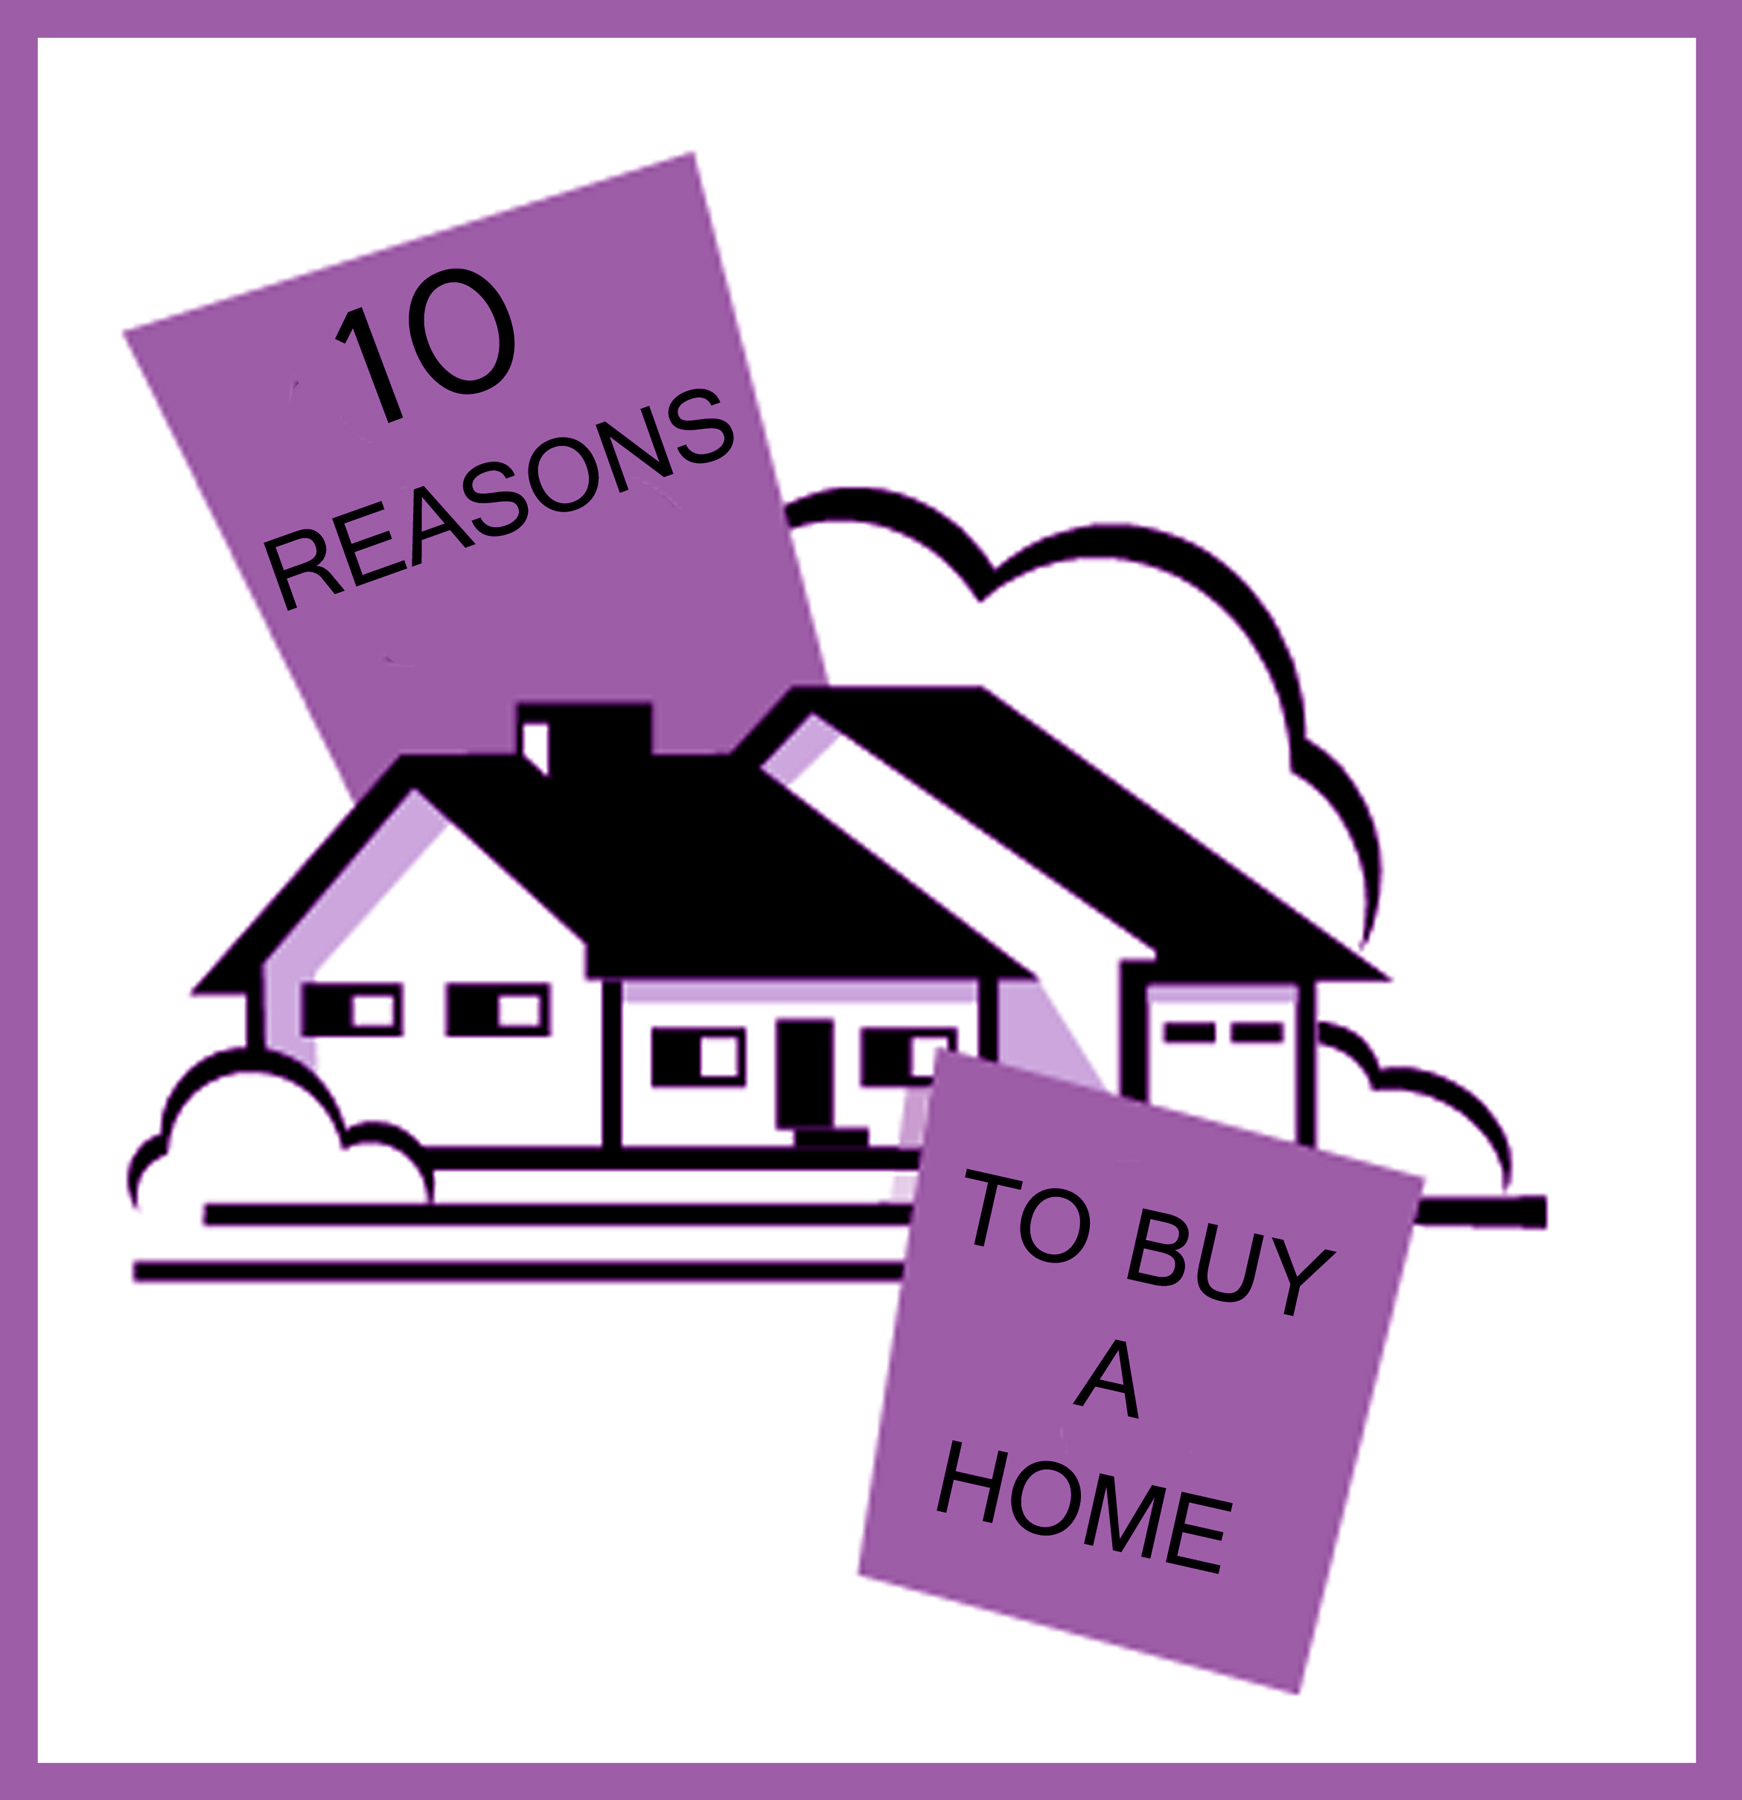 10 Reasons To Buy a Home | Clipart Panda - Free Clipart Images